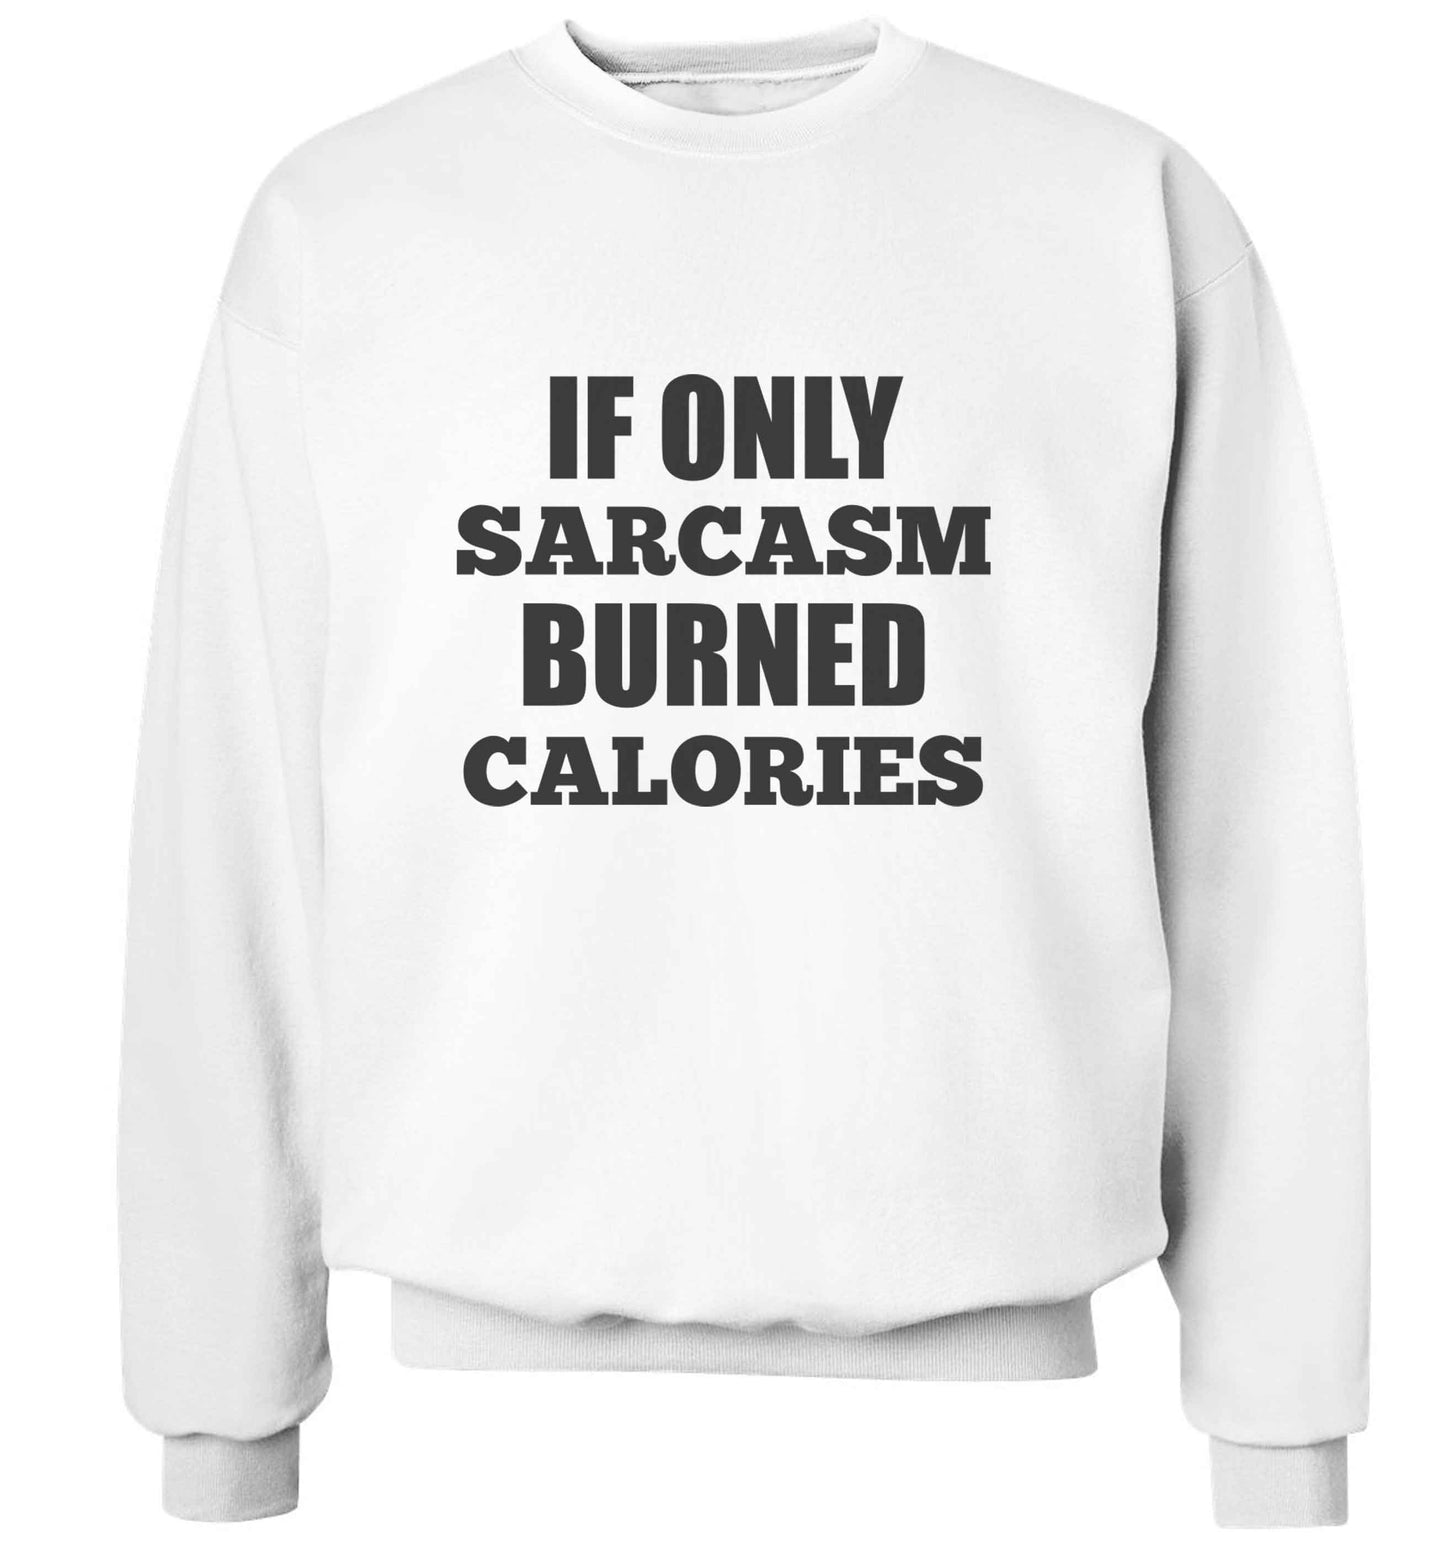 If only sarcasm burned calories adult's unisex white sweater 2XL